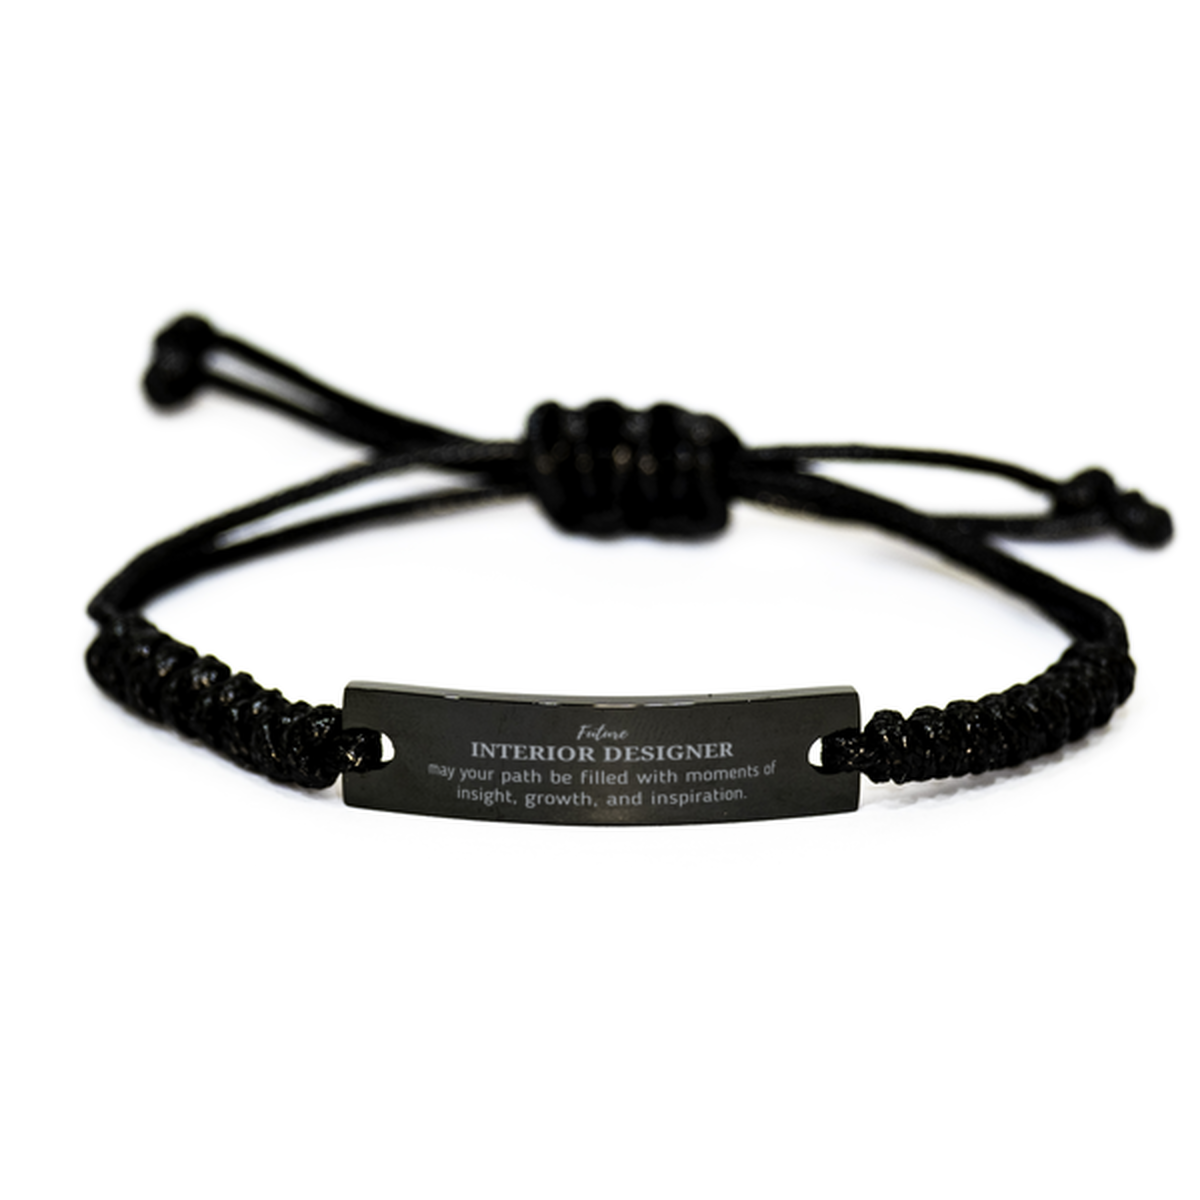 Future Interior Designer Gifts, May your path be filled with moments of insight, Graduation Gifts for New Interior Designer, Christmas Unique Black Rope Bracelet For Men, Women, Friends